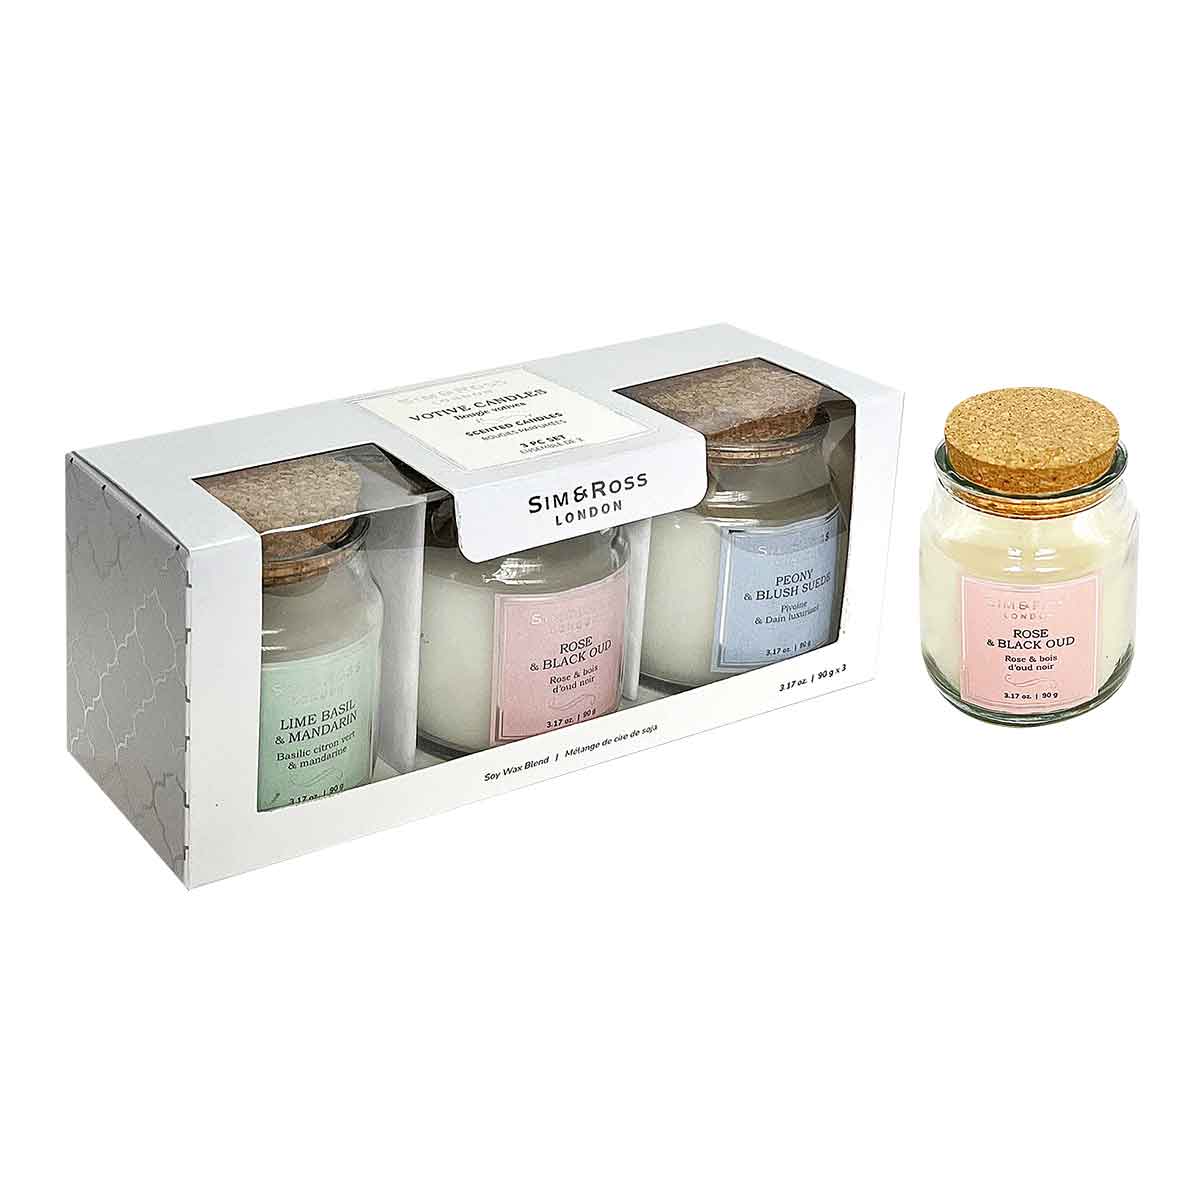 Company Premium Soy Candle Making Kit Full Set Big Glass Jars & Tins Soy  Wax for Candle Making -  Sweden